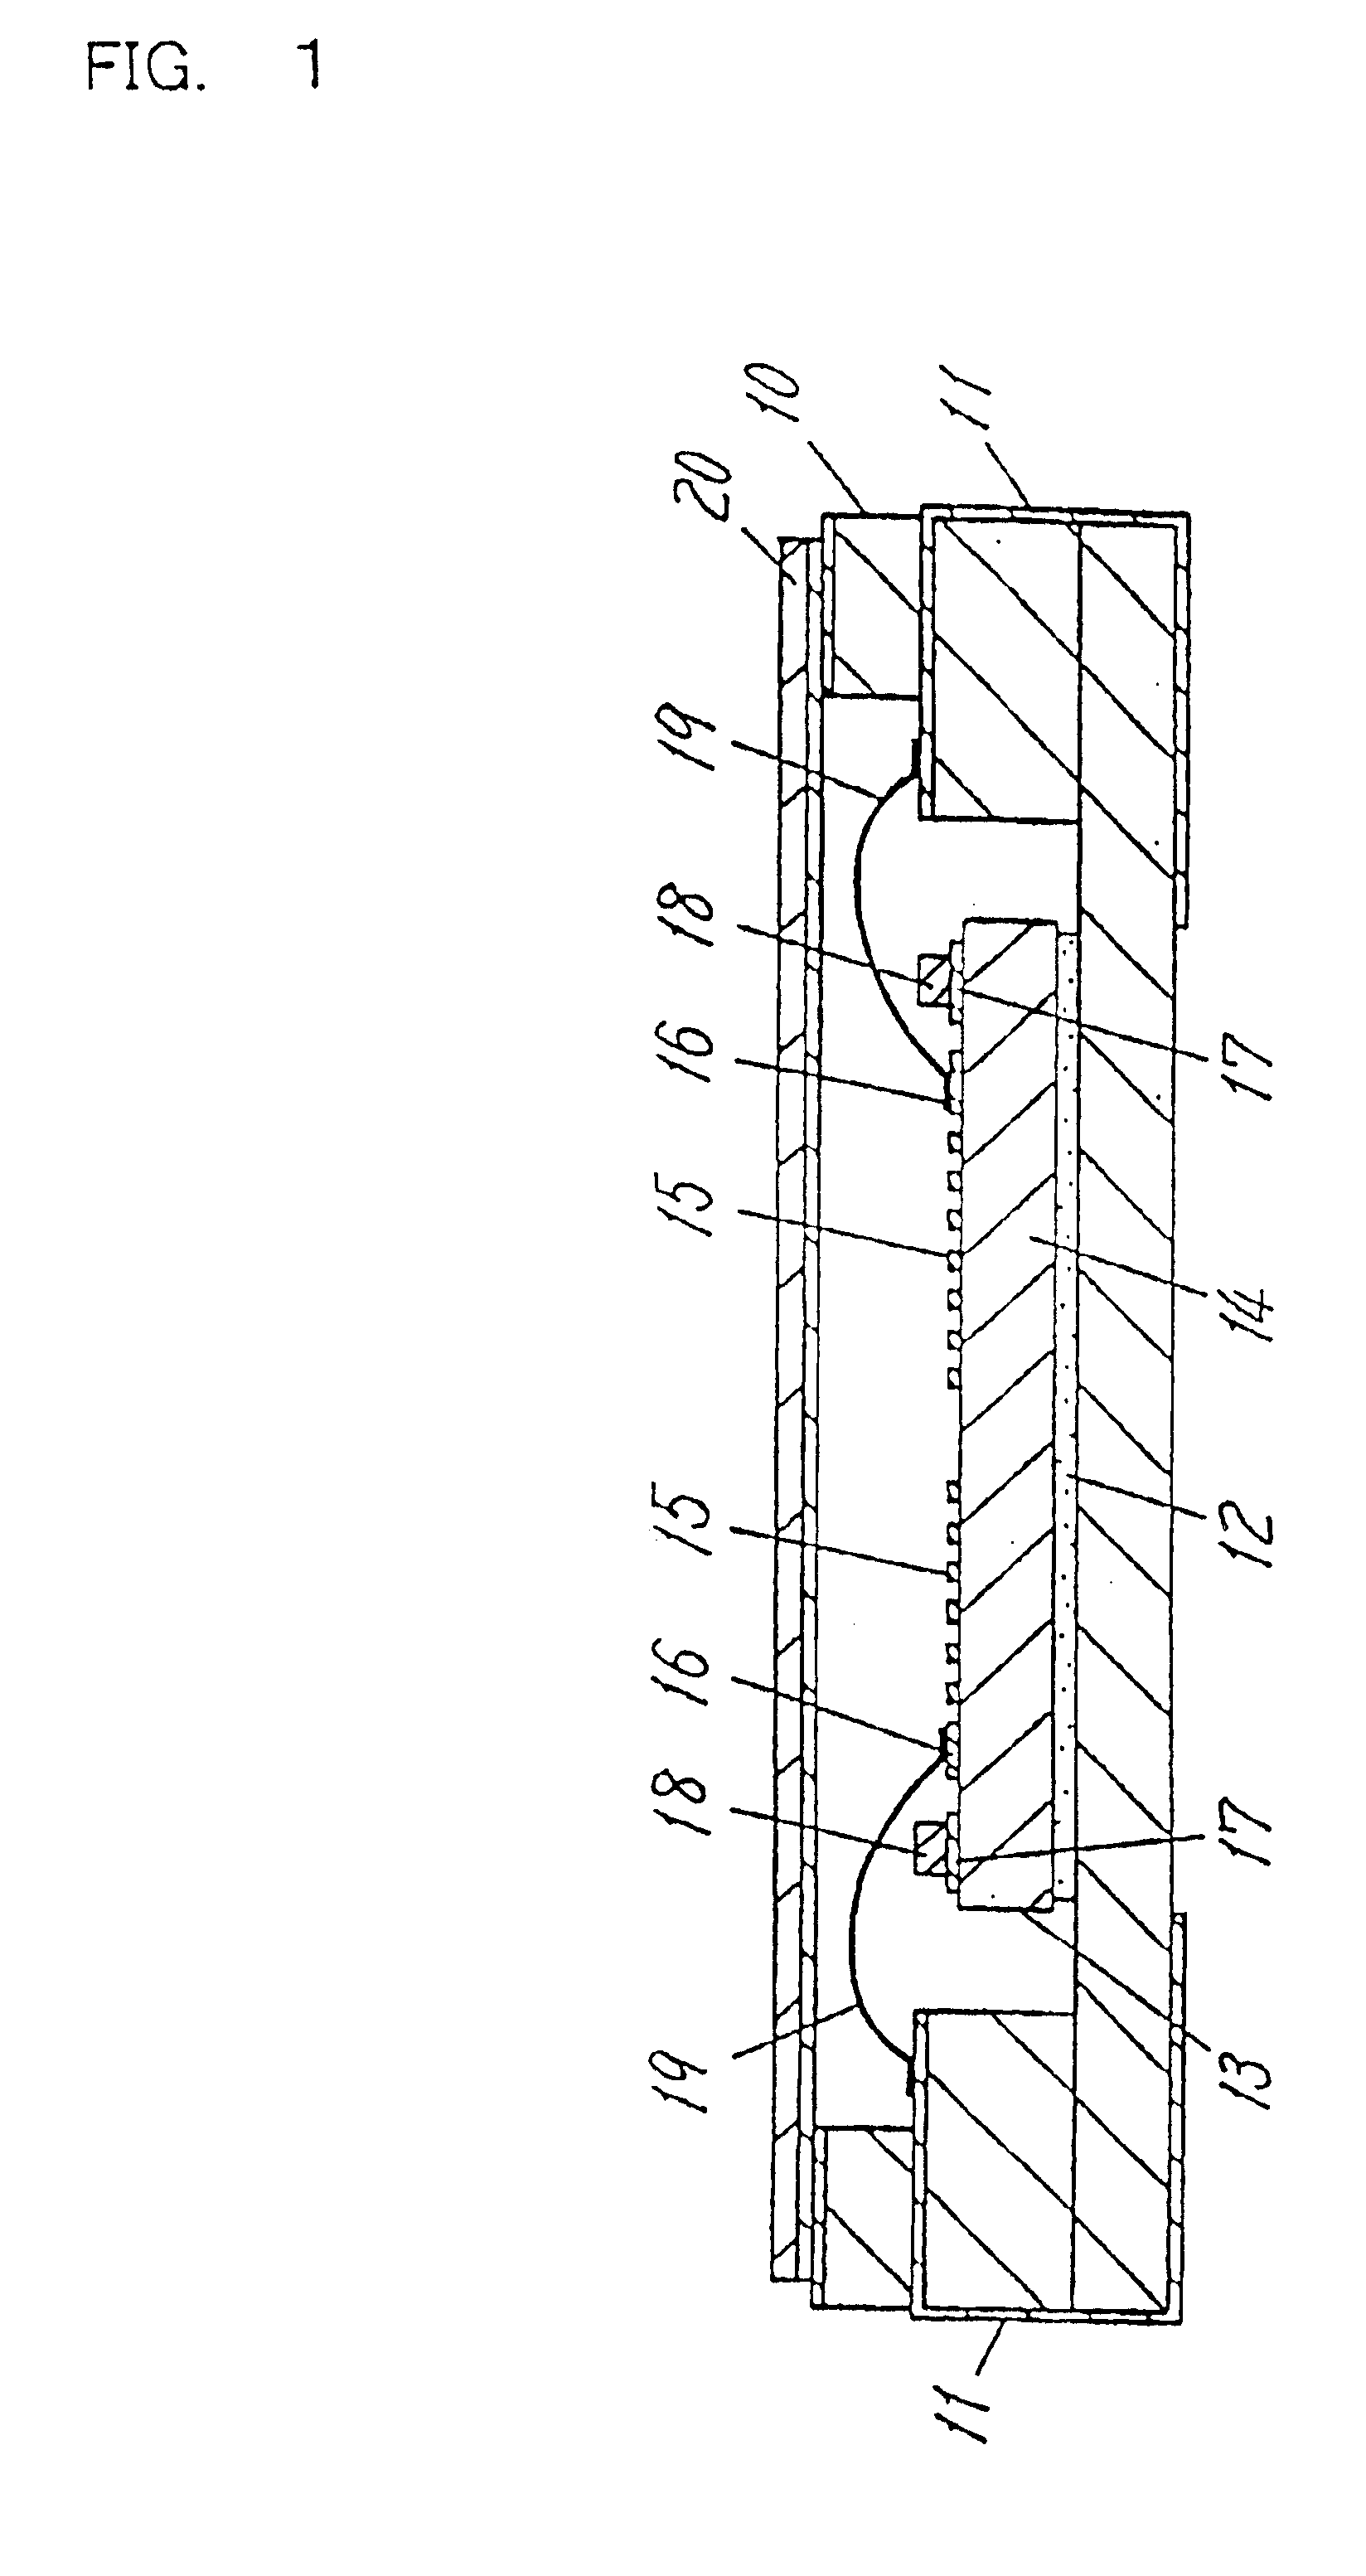 Method of manufacturing a surface acoustic wave device